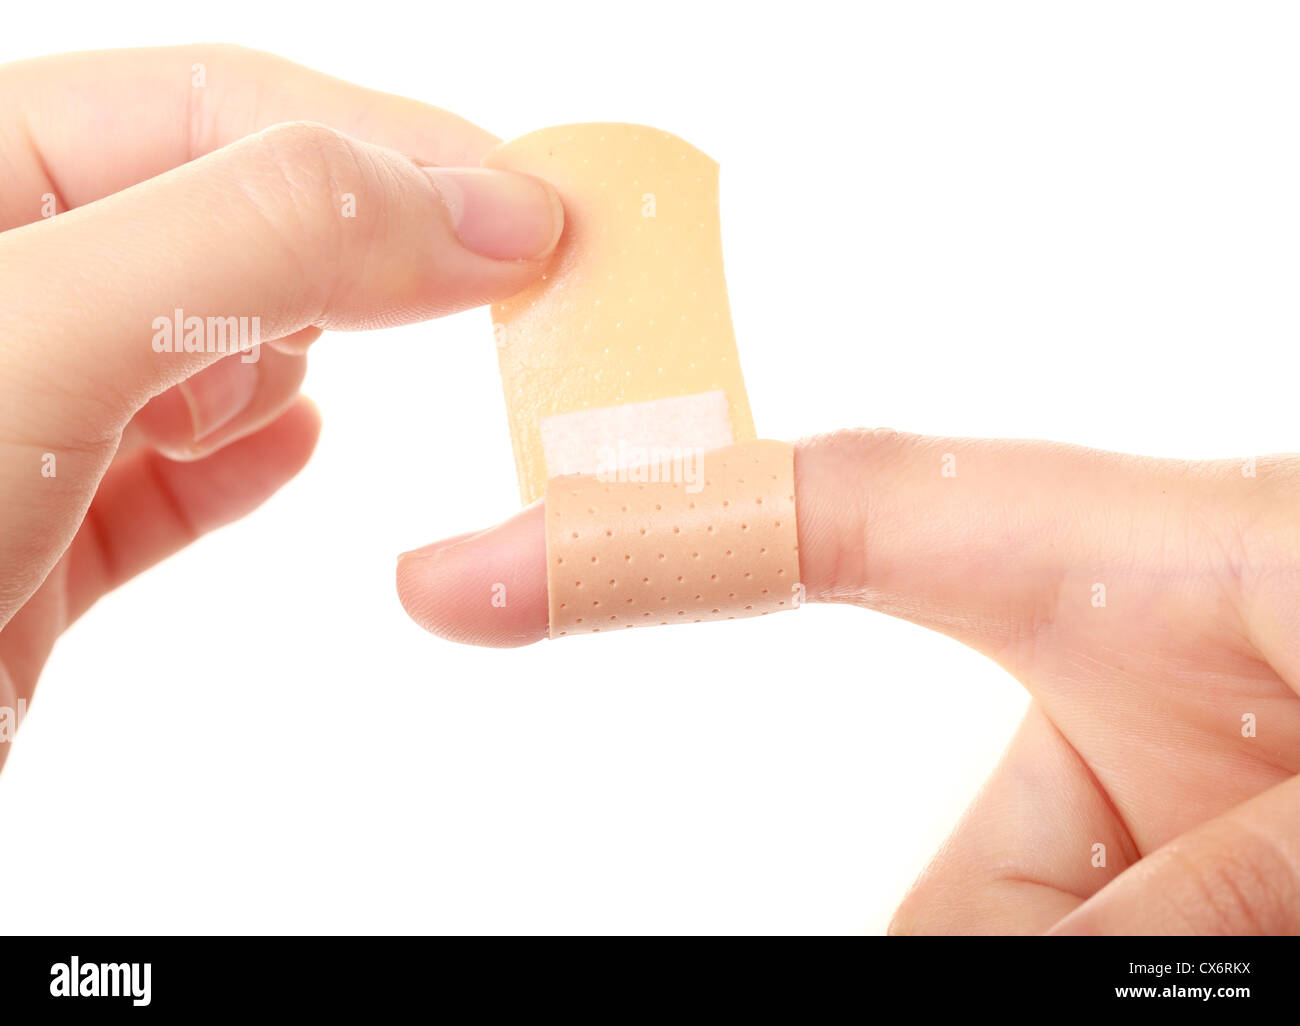 Closeup of of woman's hands with band-aid, on white background Stock Photo